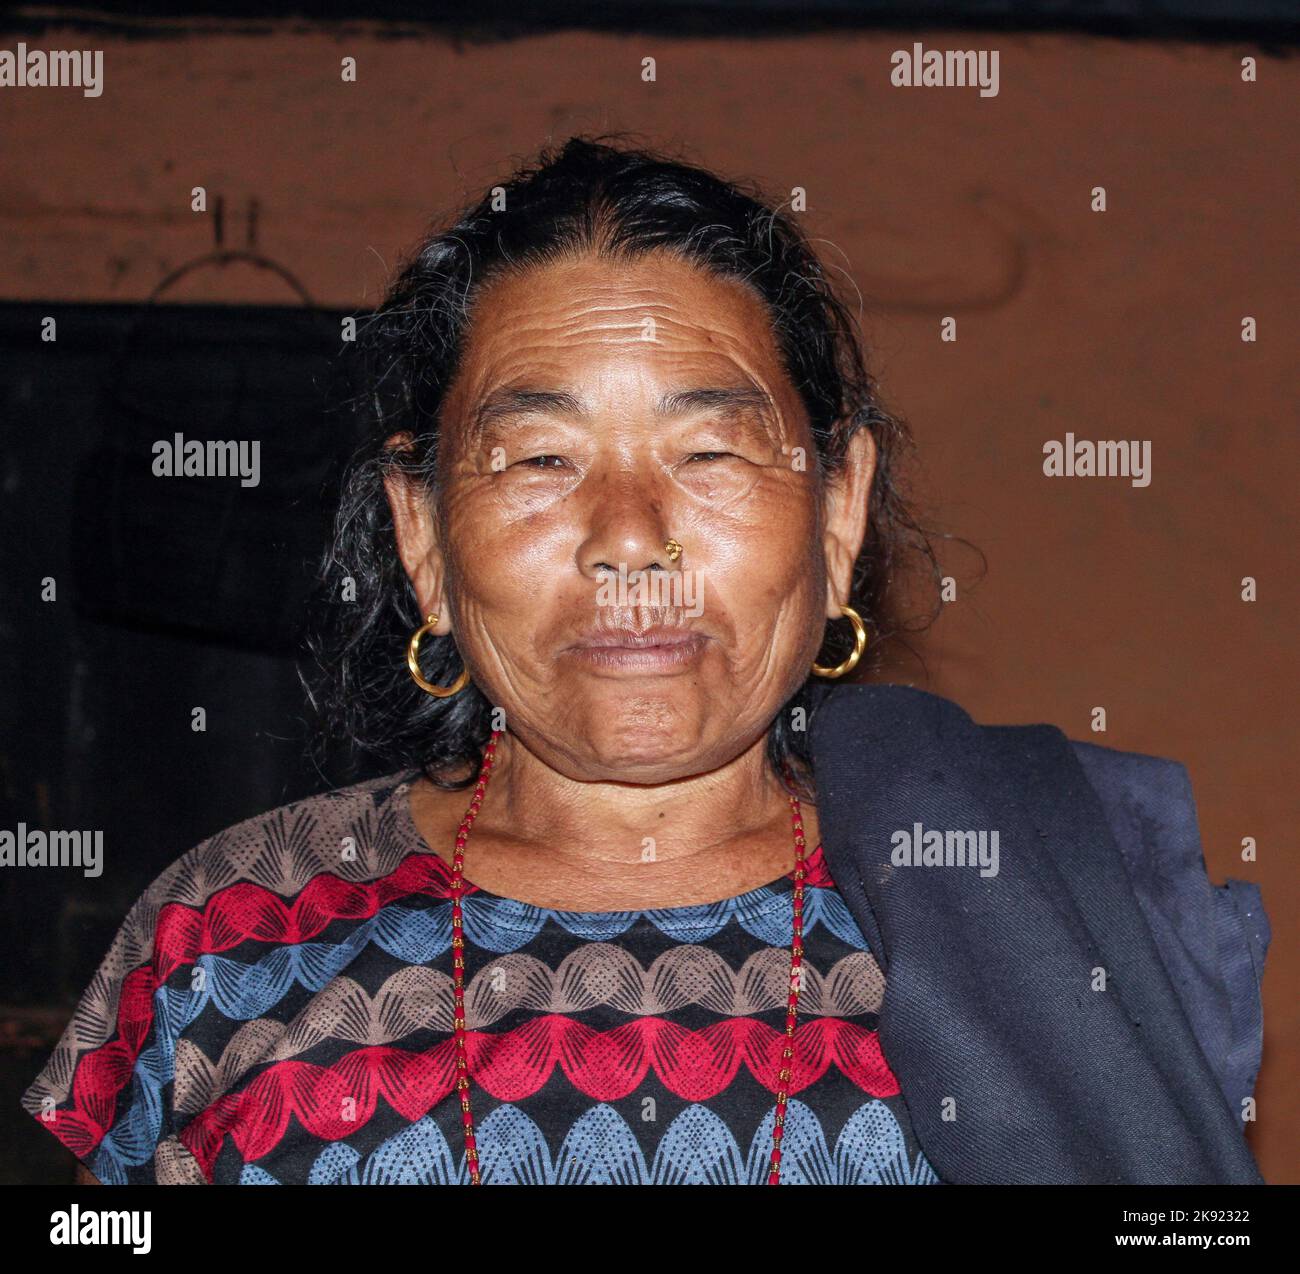 JOMSON, NEPAL - OCT 13, 2013: portrait of old nepalese woman. She wears a nose jewelry as symbol of wealth. Stock Photo